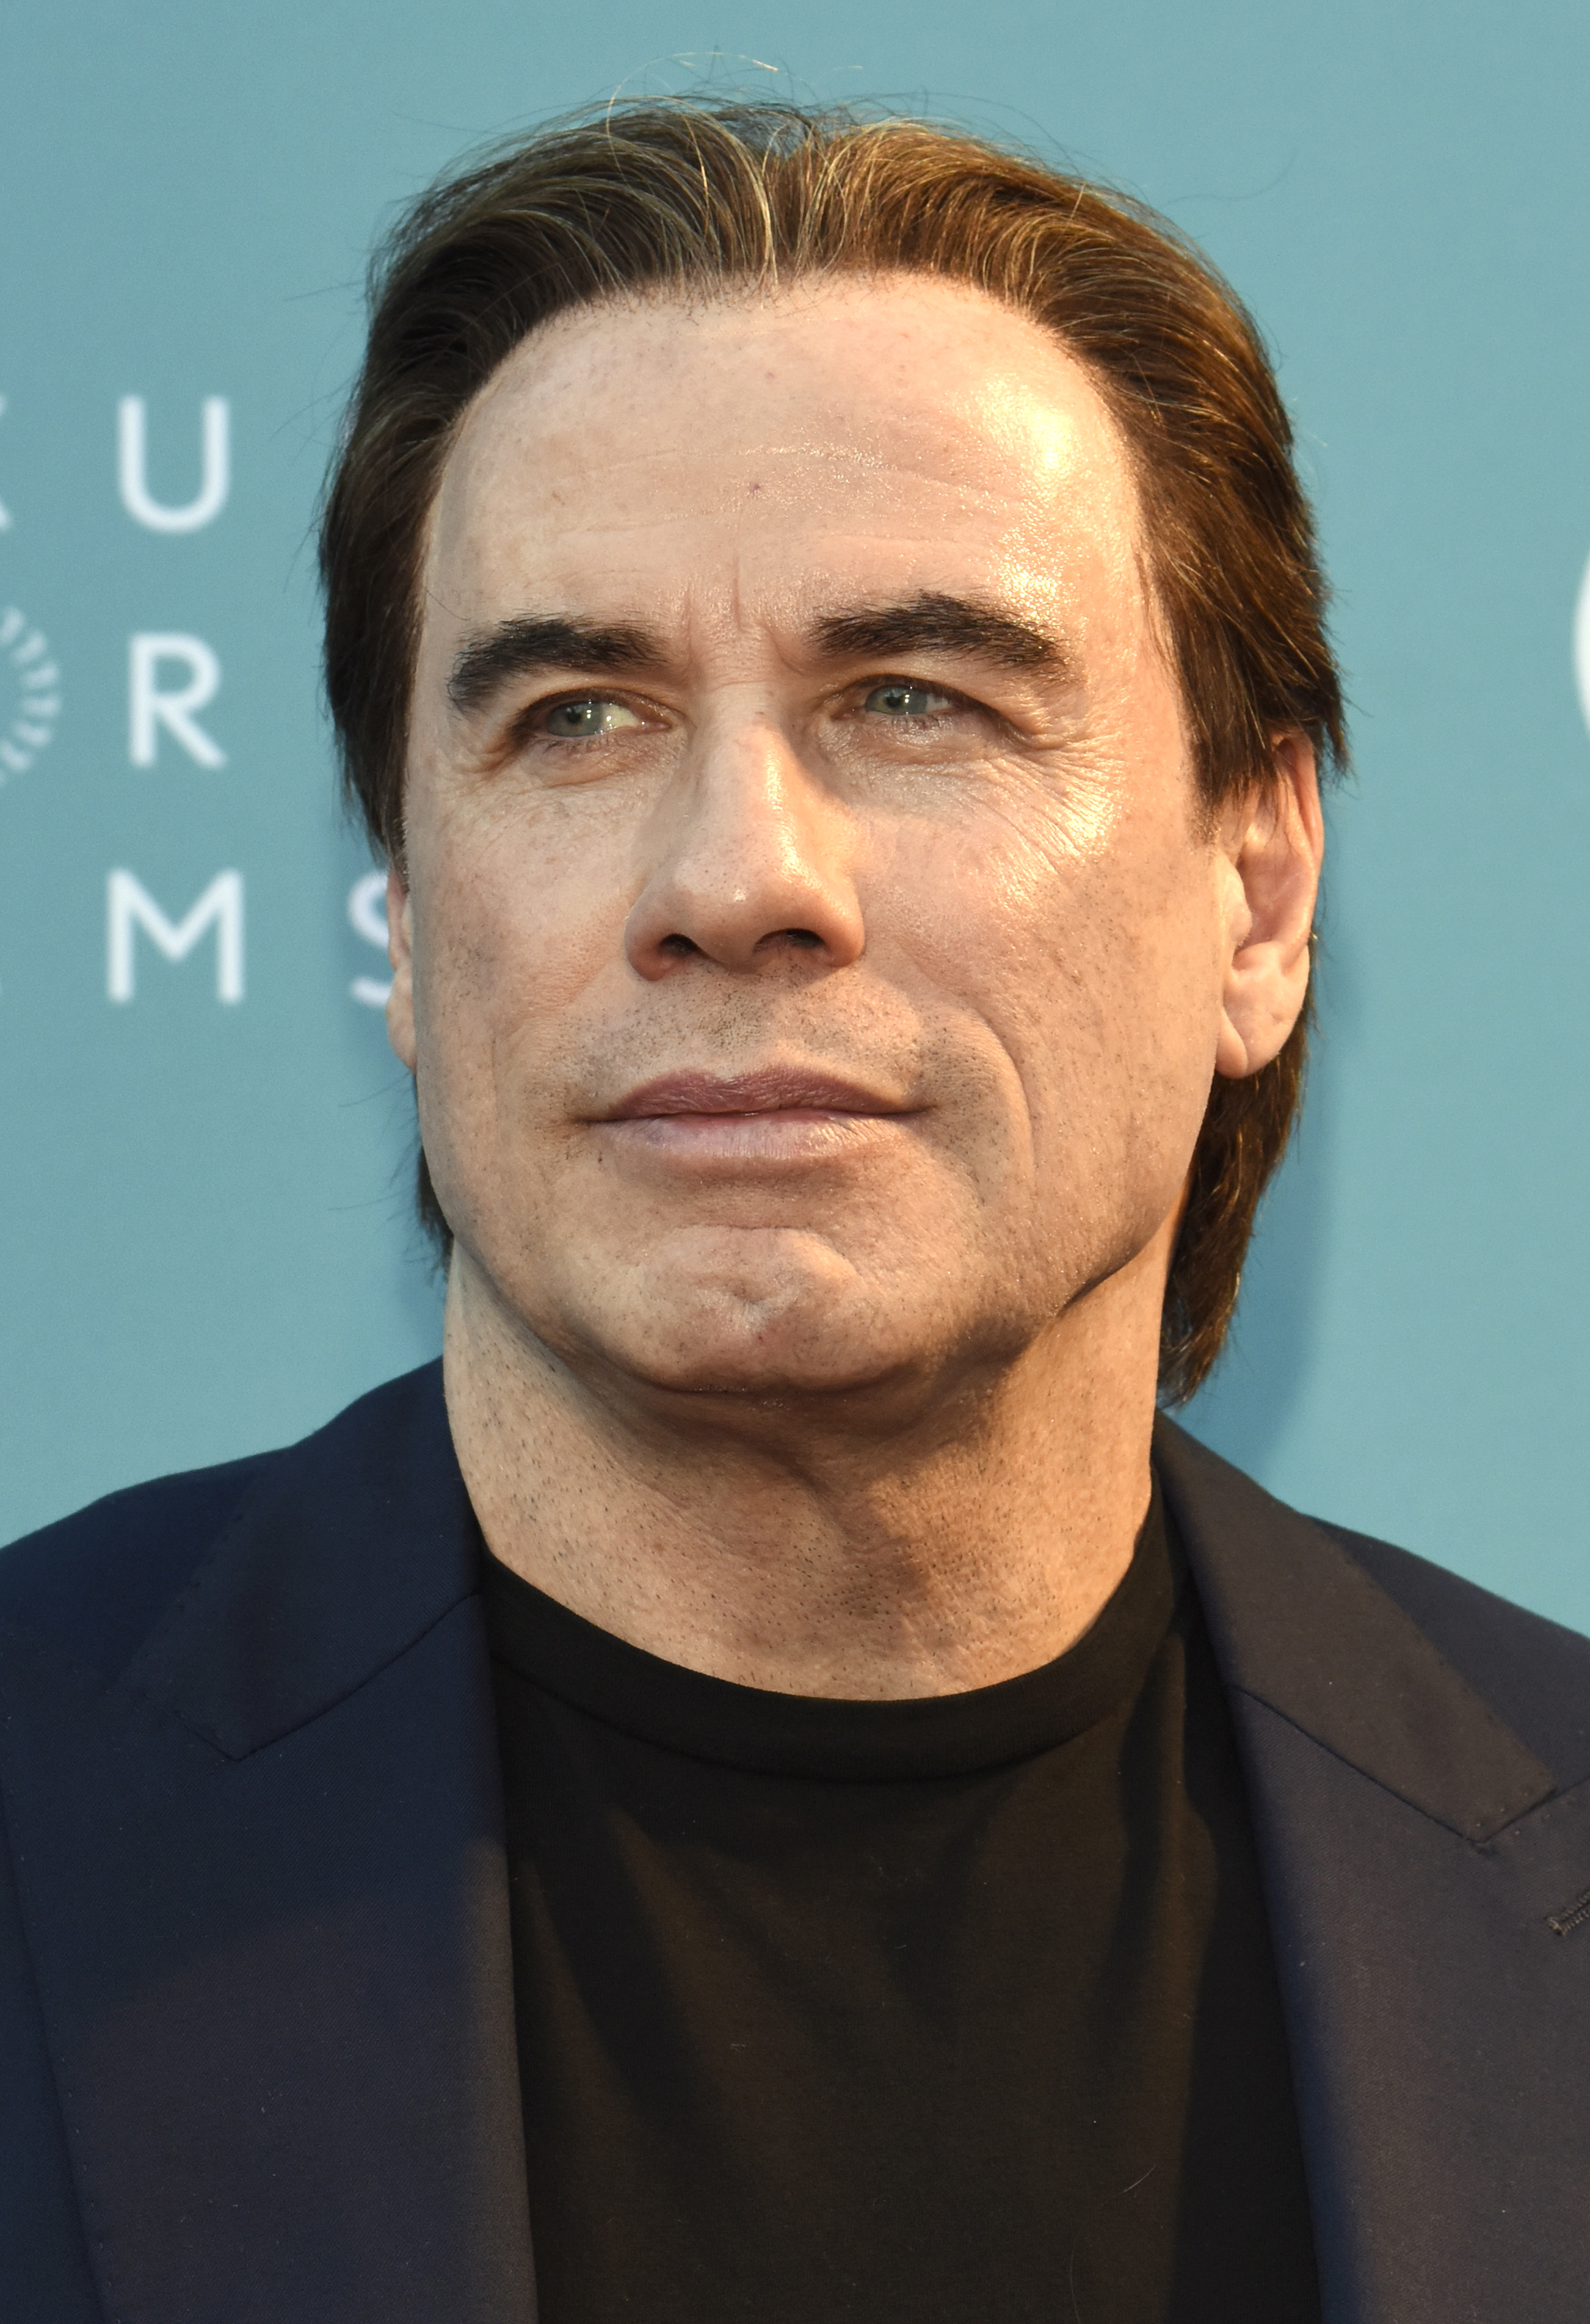 John Travolta at the world premiere of "Life on the Line" during the 2015 Napa Valley Film Festival on November 14, 2015, in California. | Source: Getty Images